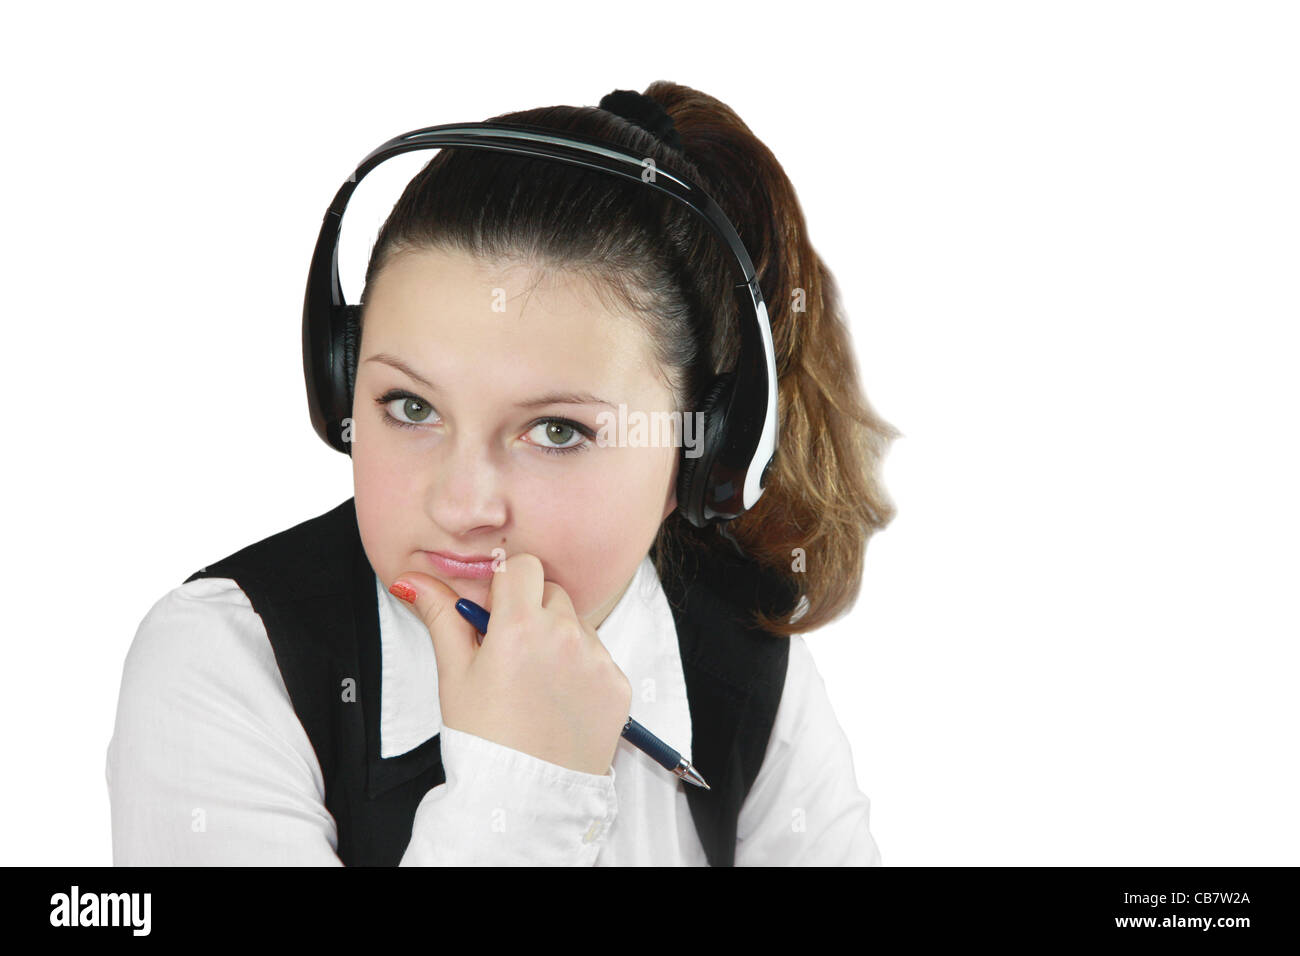 a young office worker girl in headphones operator Stock Photo